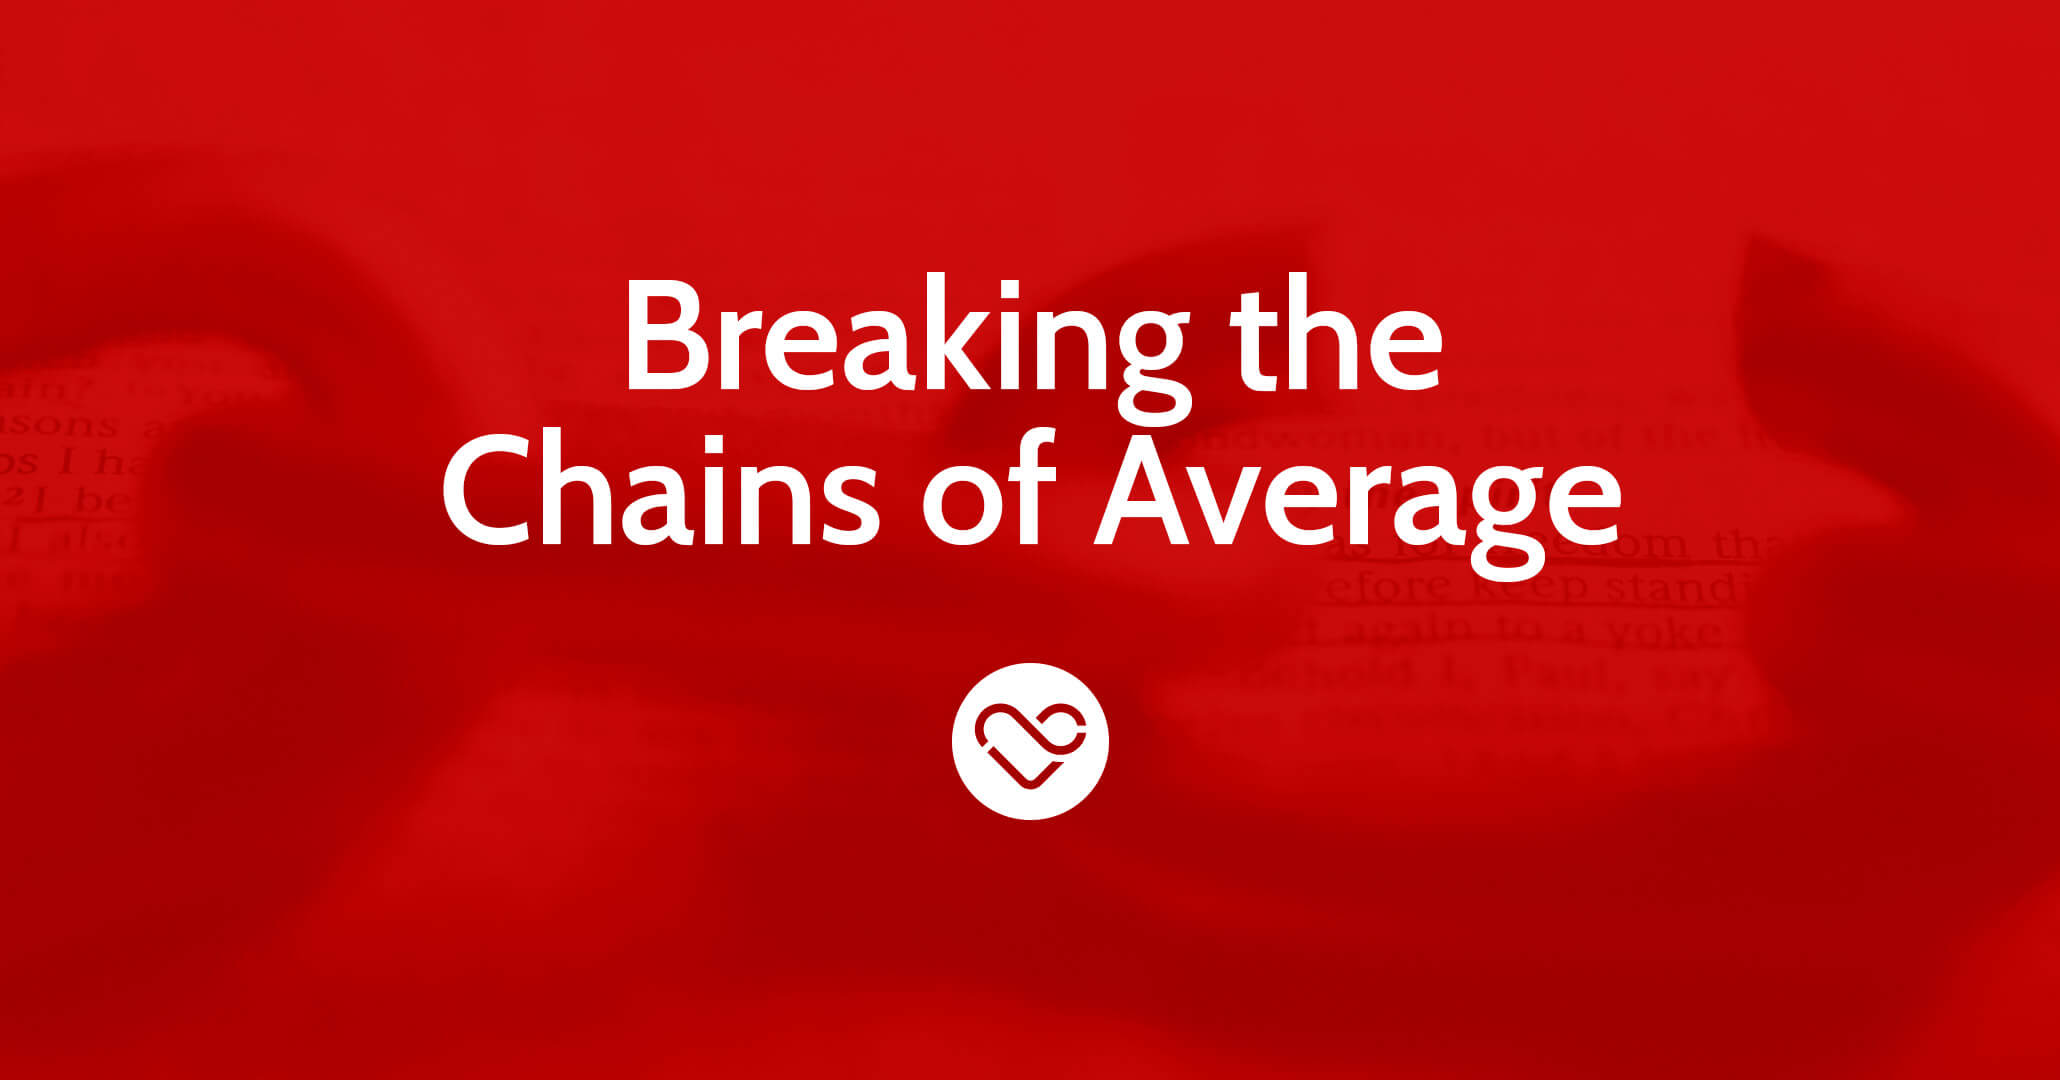 Breaking the Chains of Average